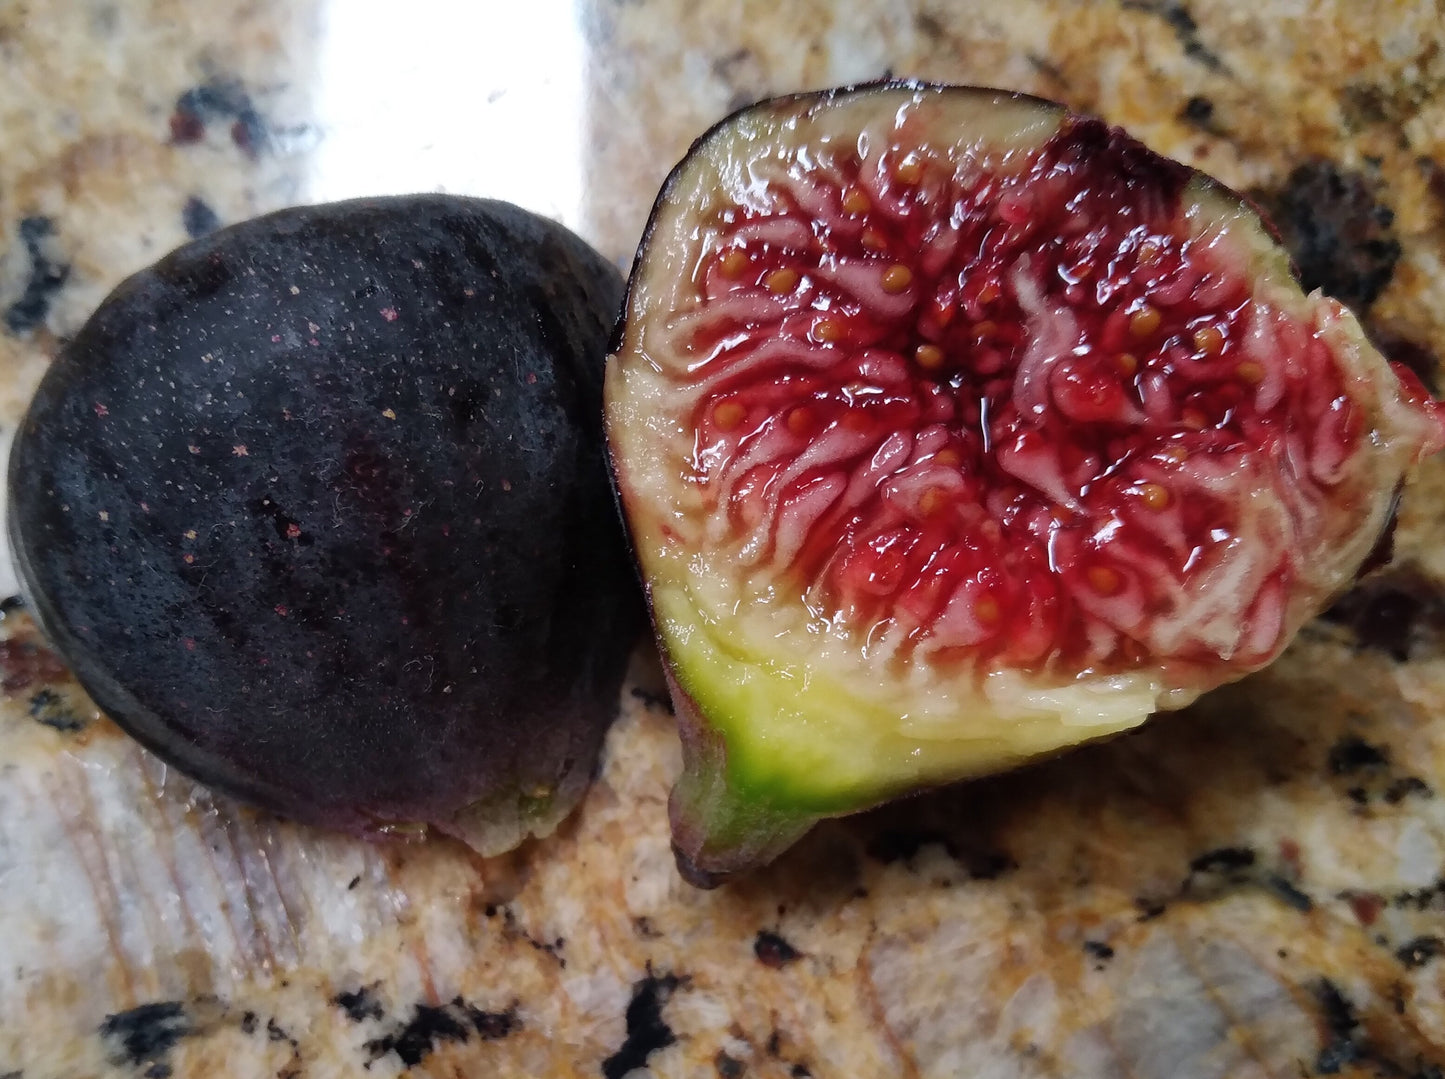 Corky's / Palmata Hybrid Fig - 2 Cuttings - New Variety - Sweet Tangy Berry Flavor